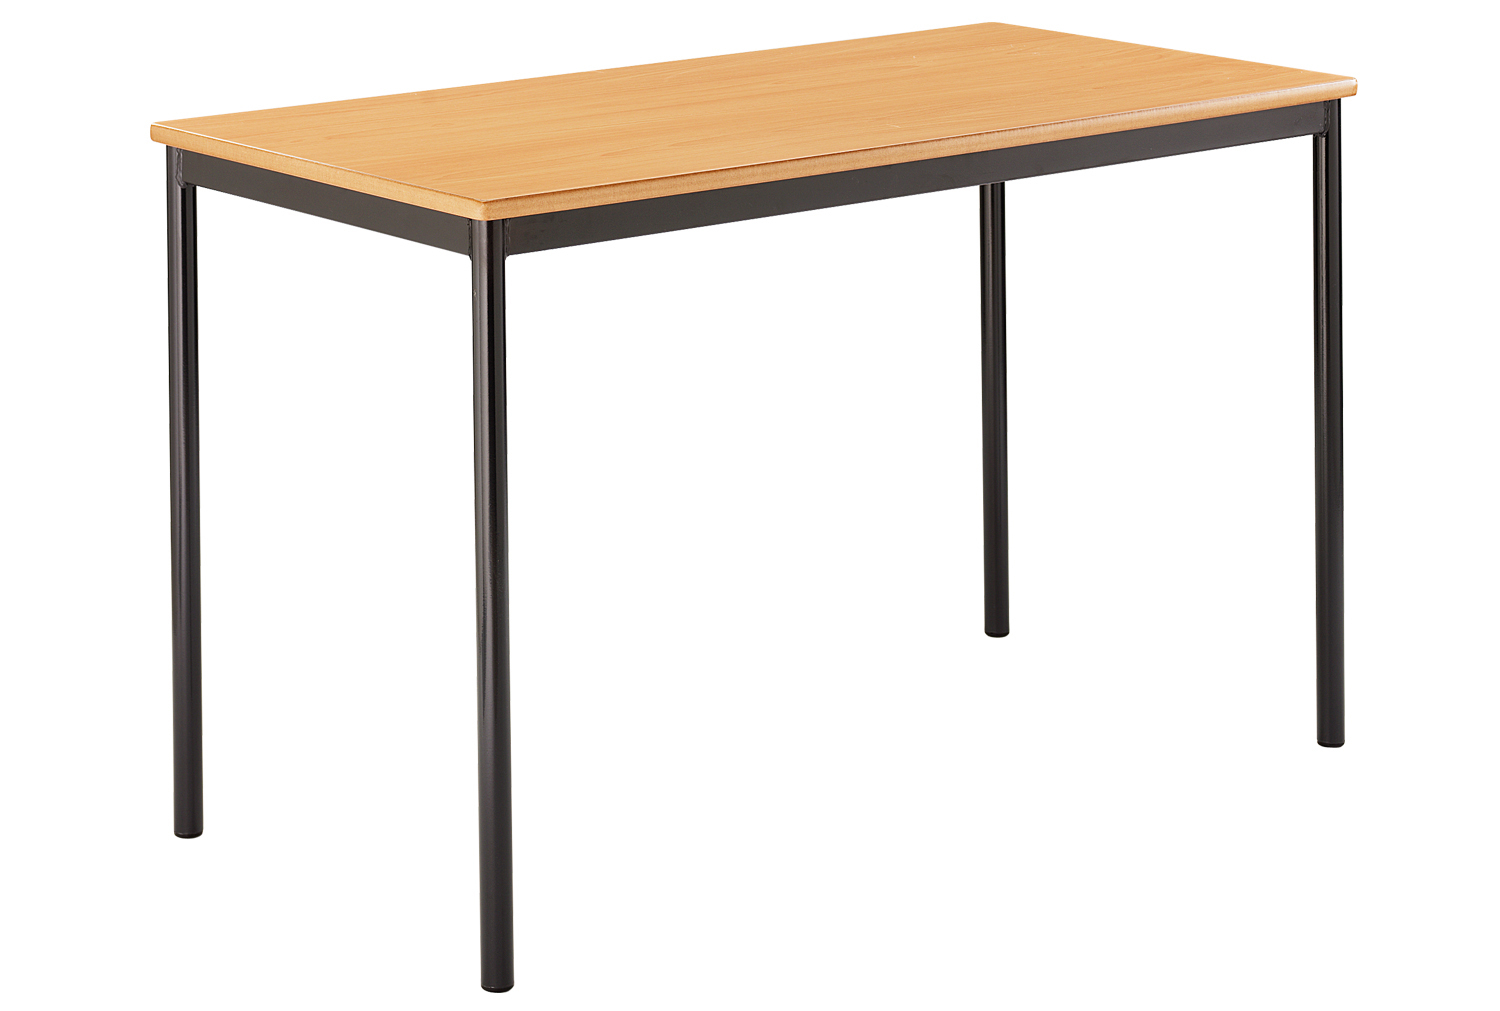 Qty 4 - Rectangular Fully Welded Classroom Tables 14+ Years, 120wx60dx76h (cm), Black Frame, Beech Top, MDF Beech Edge